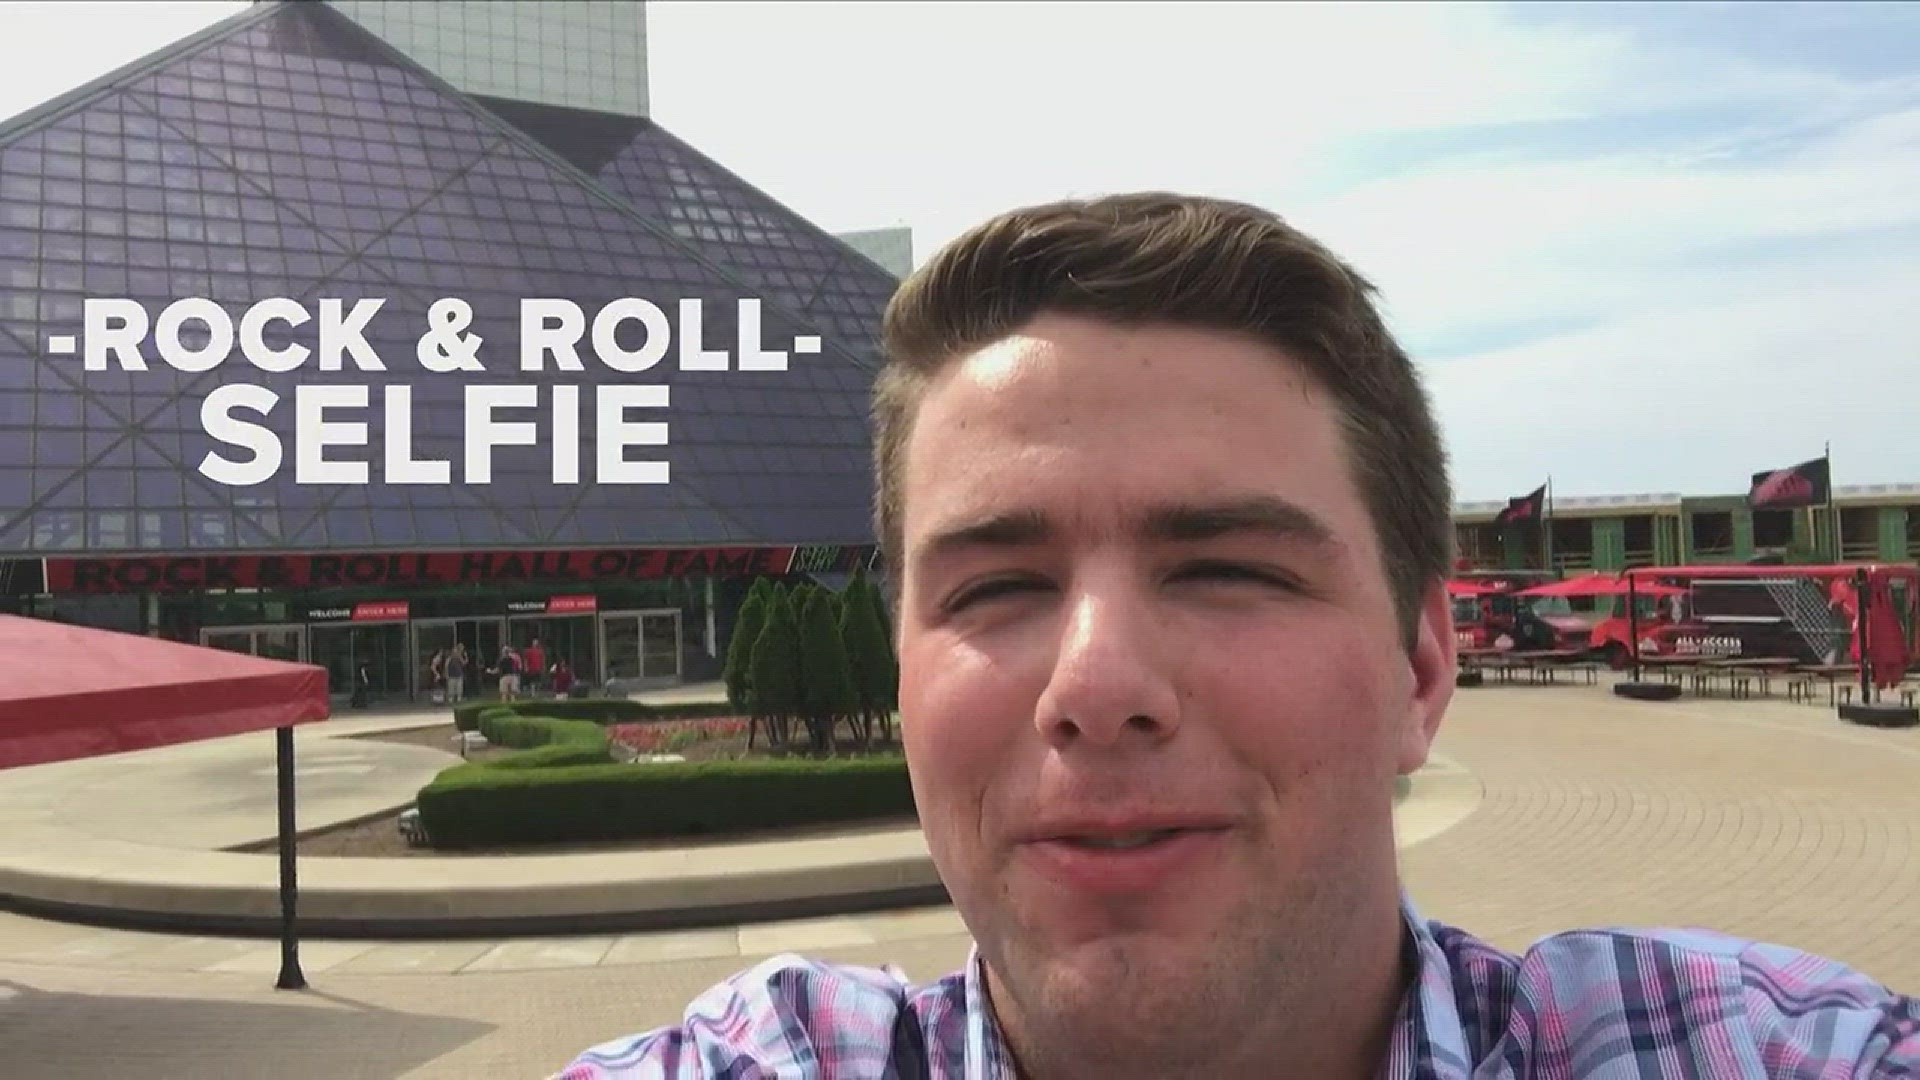 National Selfie Day At The Rock 'n' Roll Hall Of Fame